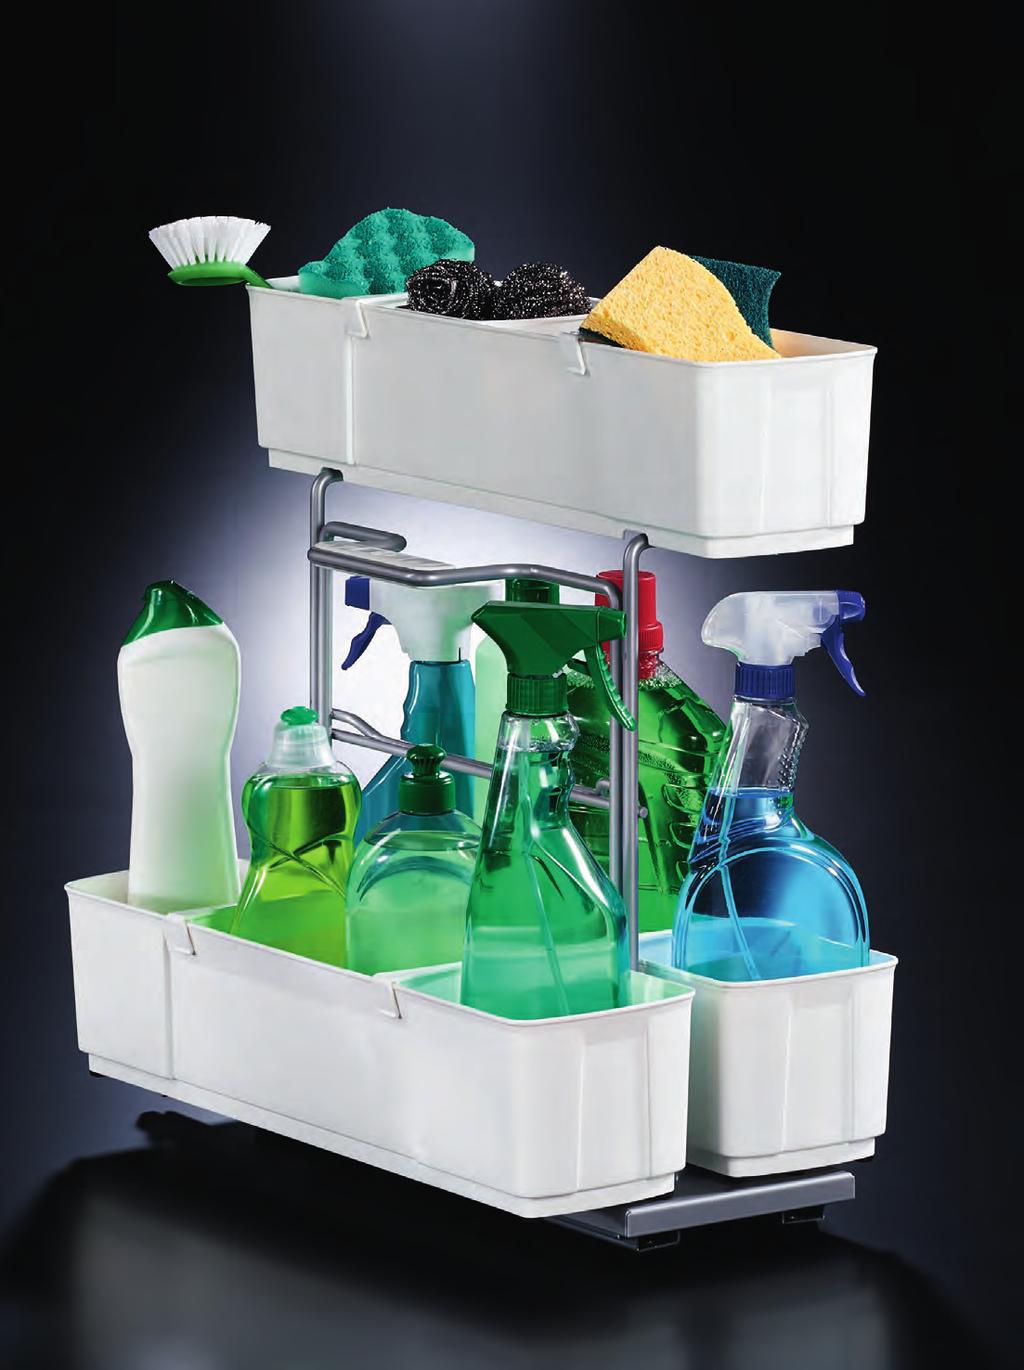 cleaningagent PICK-UP-AND-GO CLEAR THE CLUTTER THE KESSEBÖHMER cleaningagent IS FUNCTIONAL, PORTABLE AND AFFORDABLE. The caddy, complete with the clipped-on dividers, lifts right out of the pull-out.